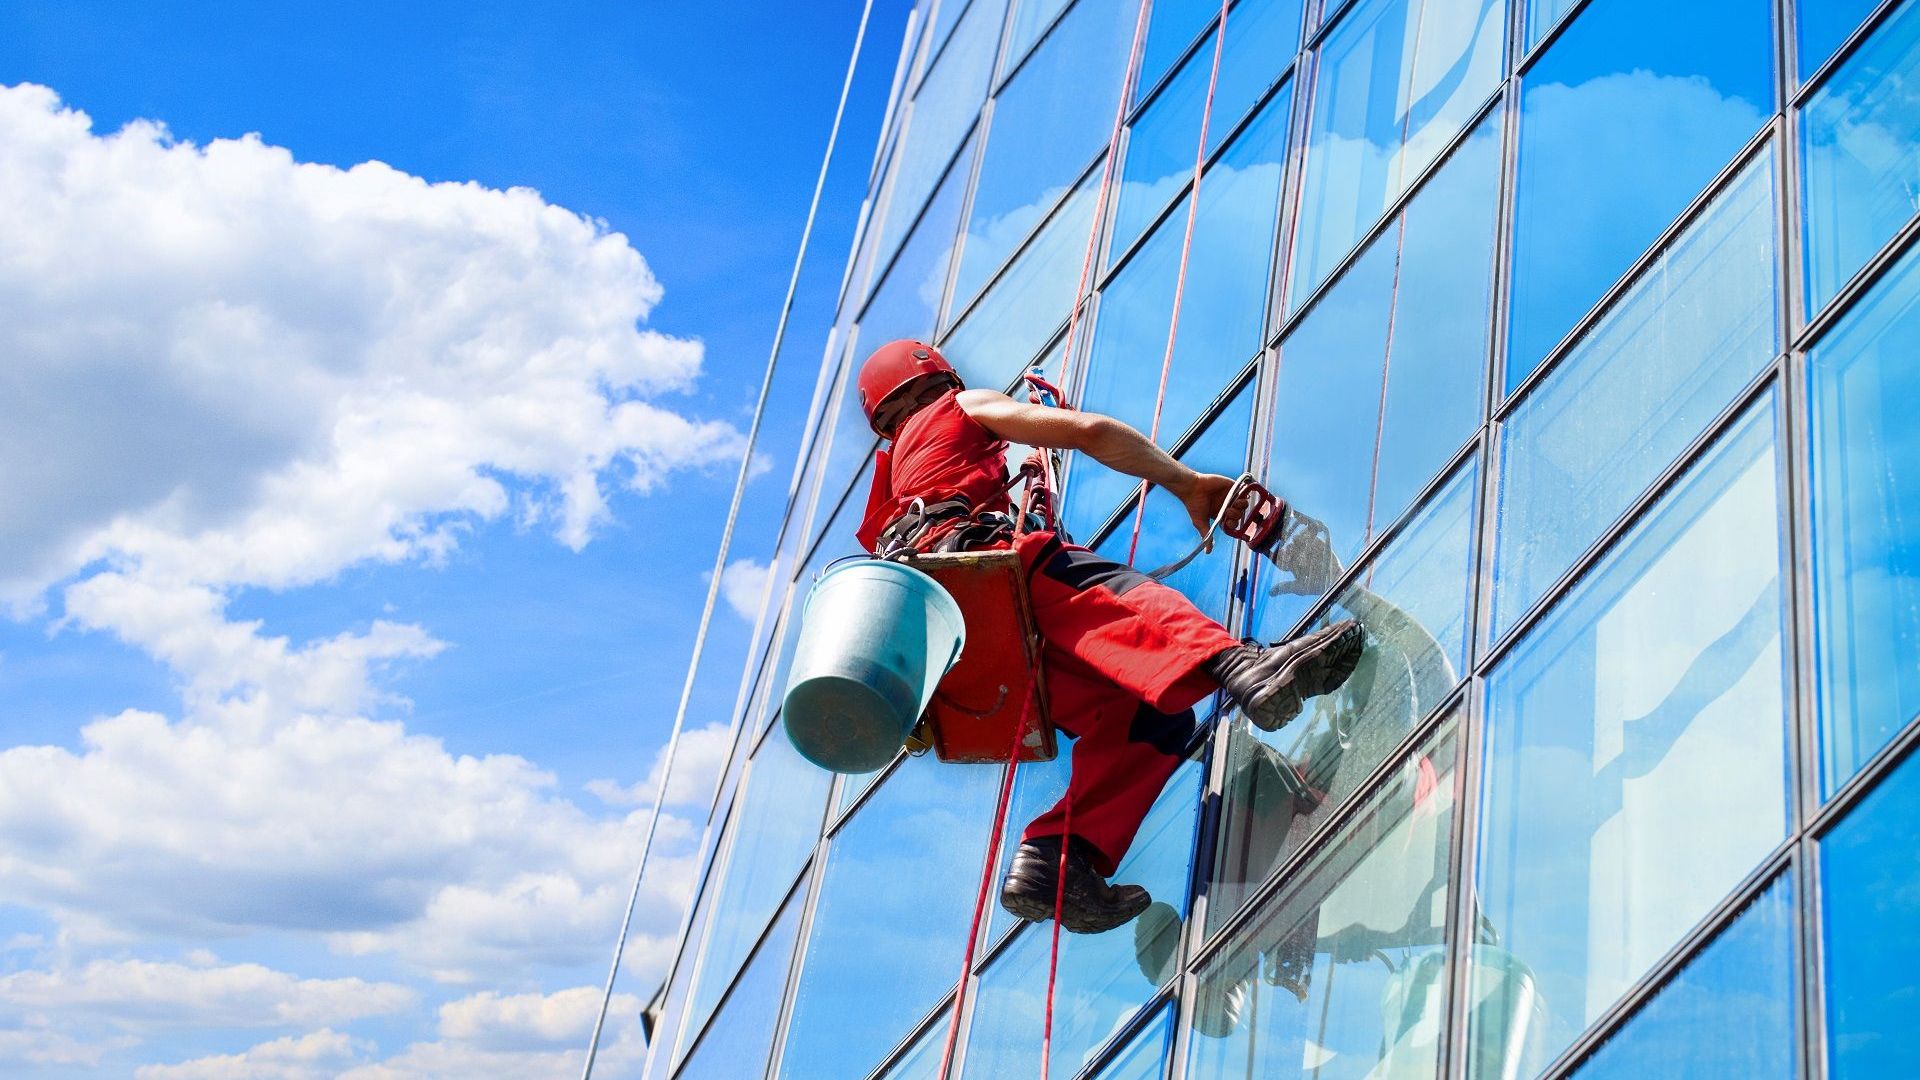 Window Cleaning Services in Leander TX